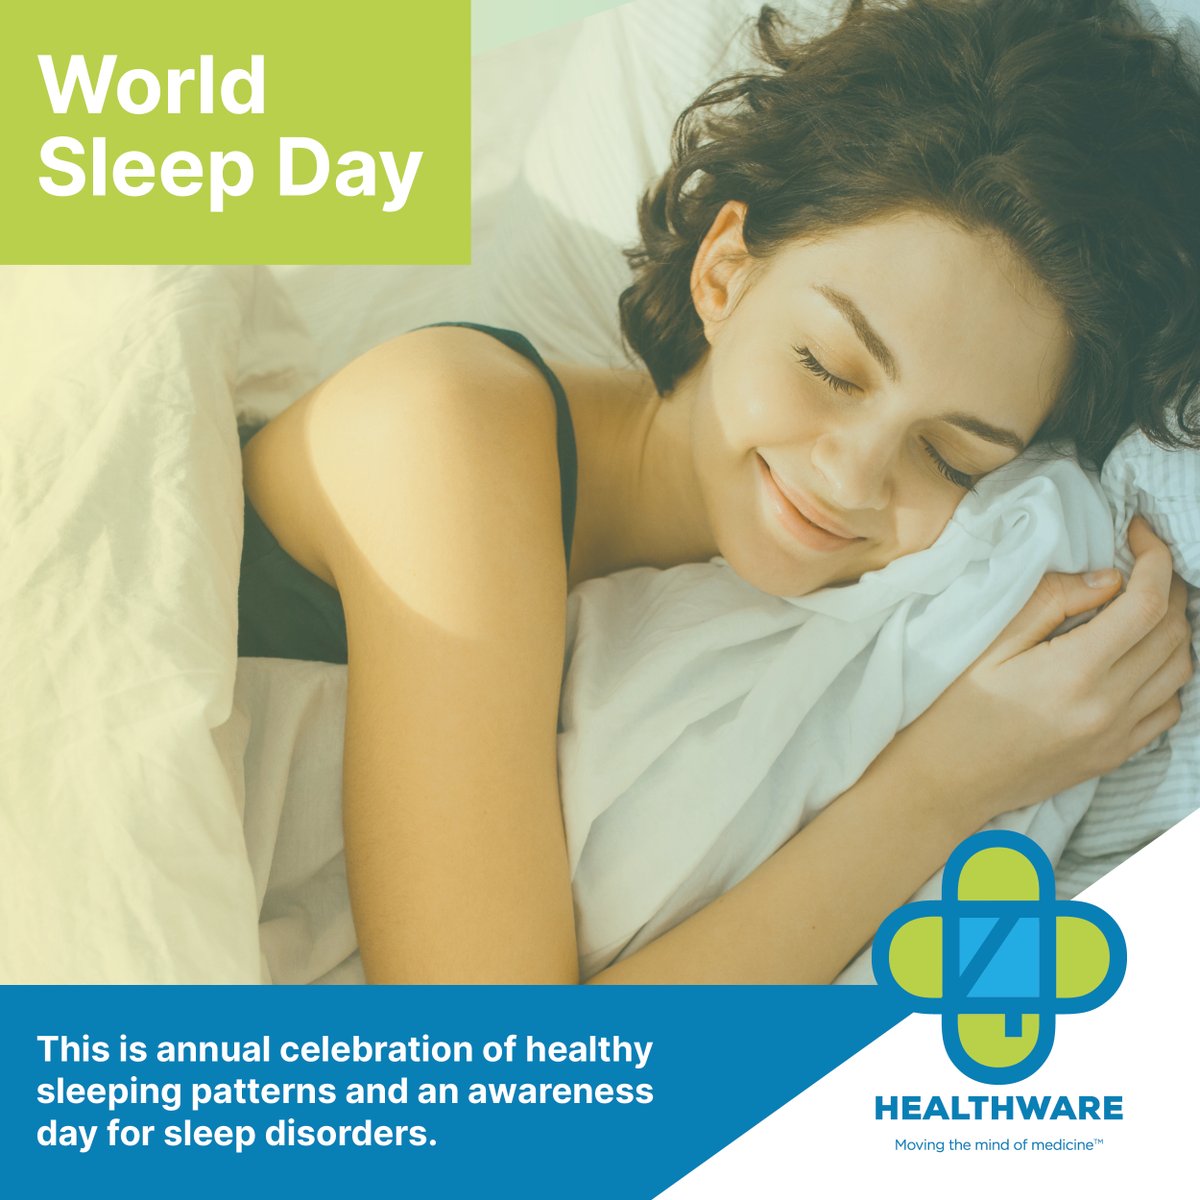 World Sleep Day is an annual celebration promoting healthy sleep patterns and raising awareness about sleep disorders. This year's theme is 'Sleep Equity for Global Health.' Remember, sleep is crucial for our overall health! #WorldSleepDay #SleepEquityforGlobalHealth